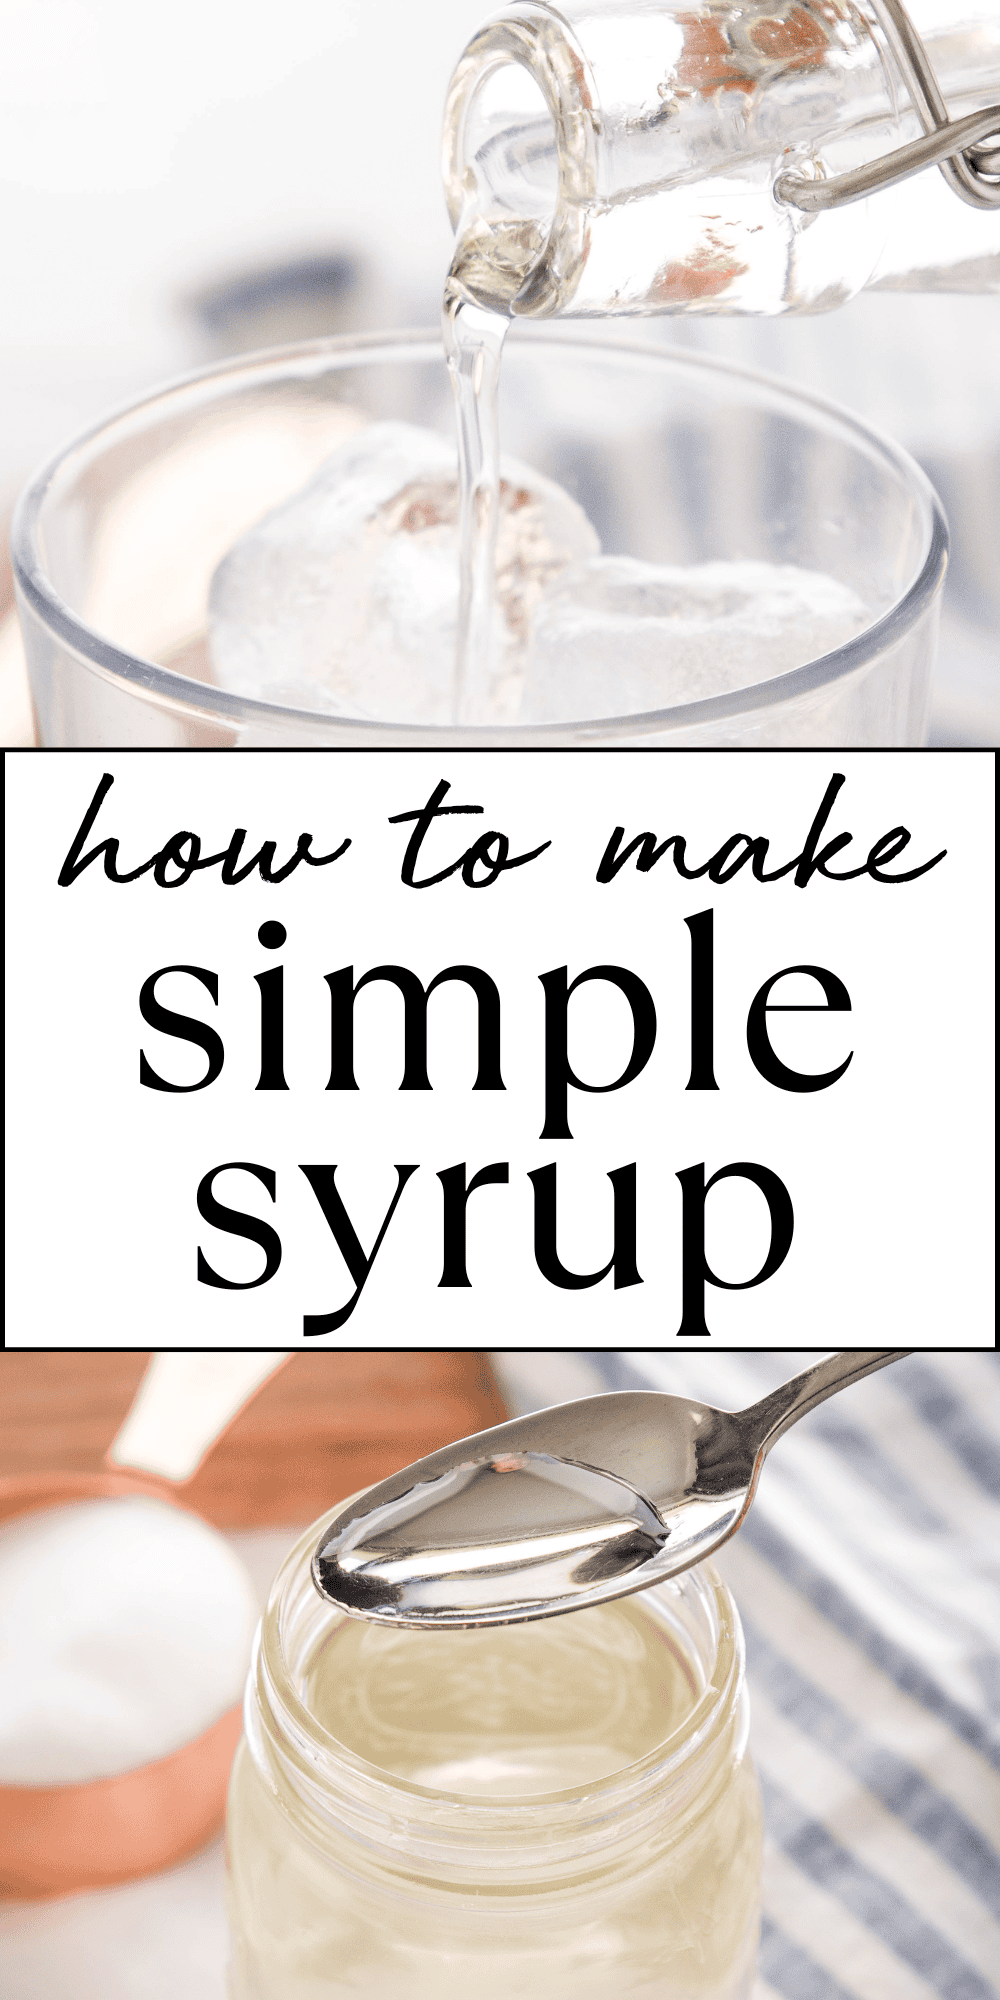 Learn how to make Simple Syrup for all your favourite drink & cocktails with only 2 ingredients! An easy simple syrup recipe tutorial. Recipe from thebusybaker.ca! #simplesyrup #richsimplesyrup #cocktailrecipe #bartenderrecipe #bartender #drinkrecipe #mocktailrecipe via @busybakerblog